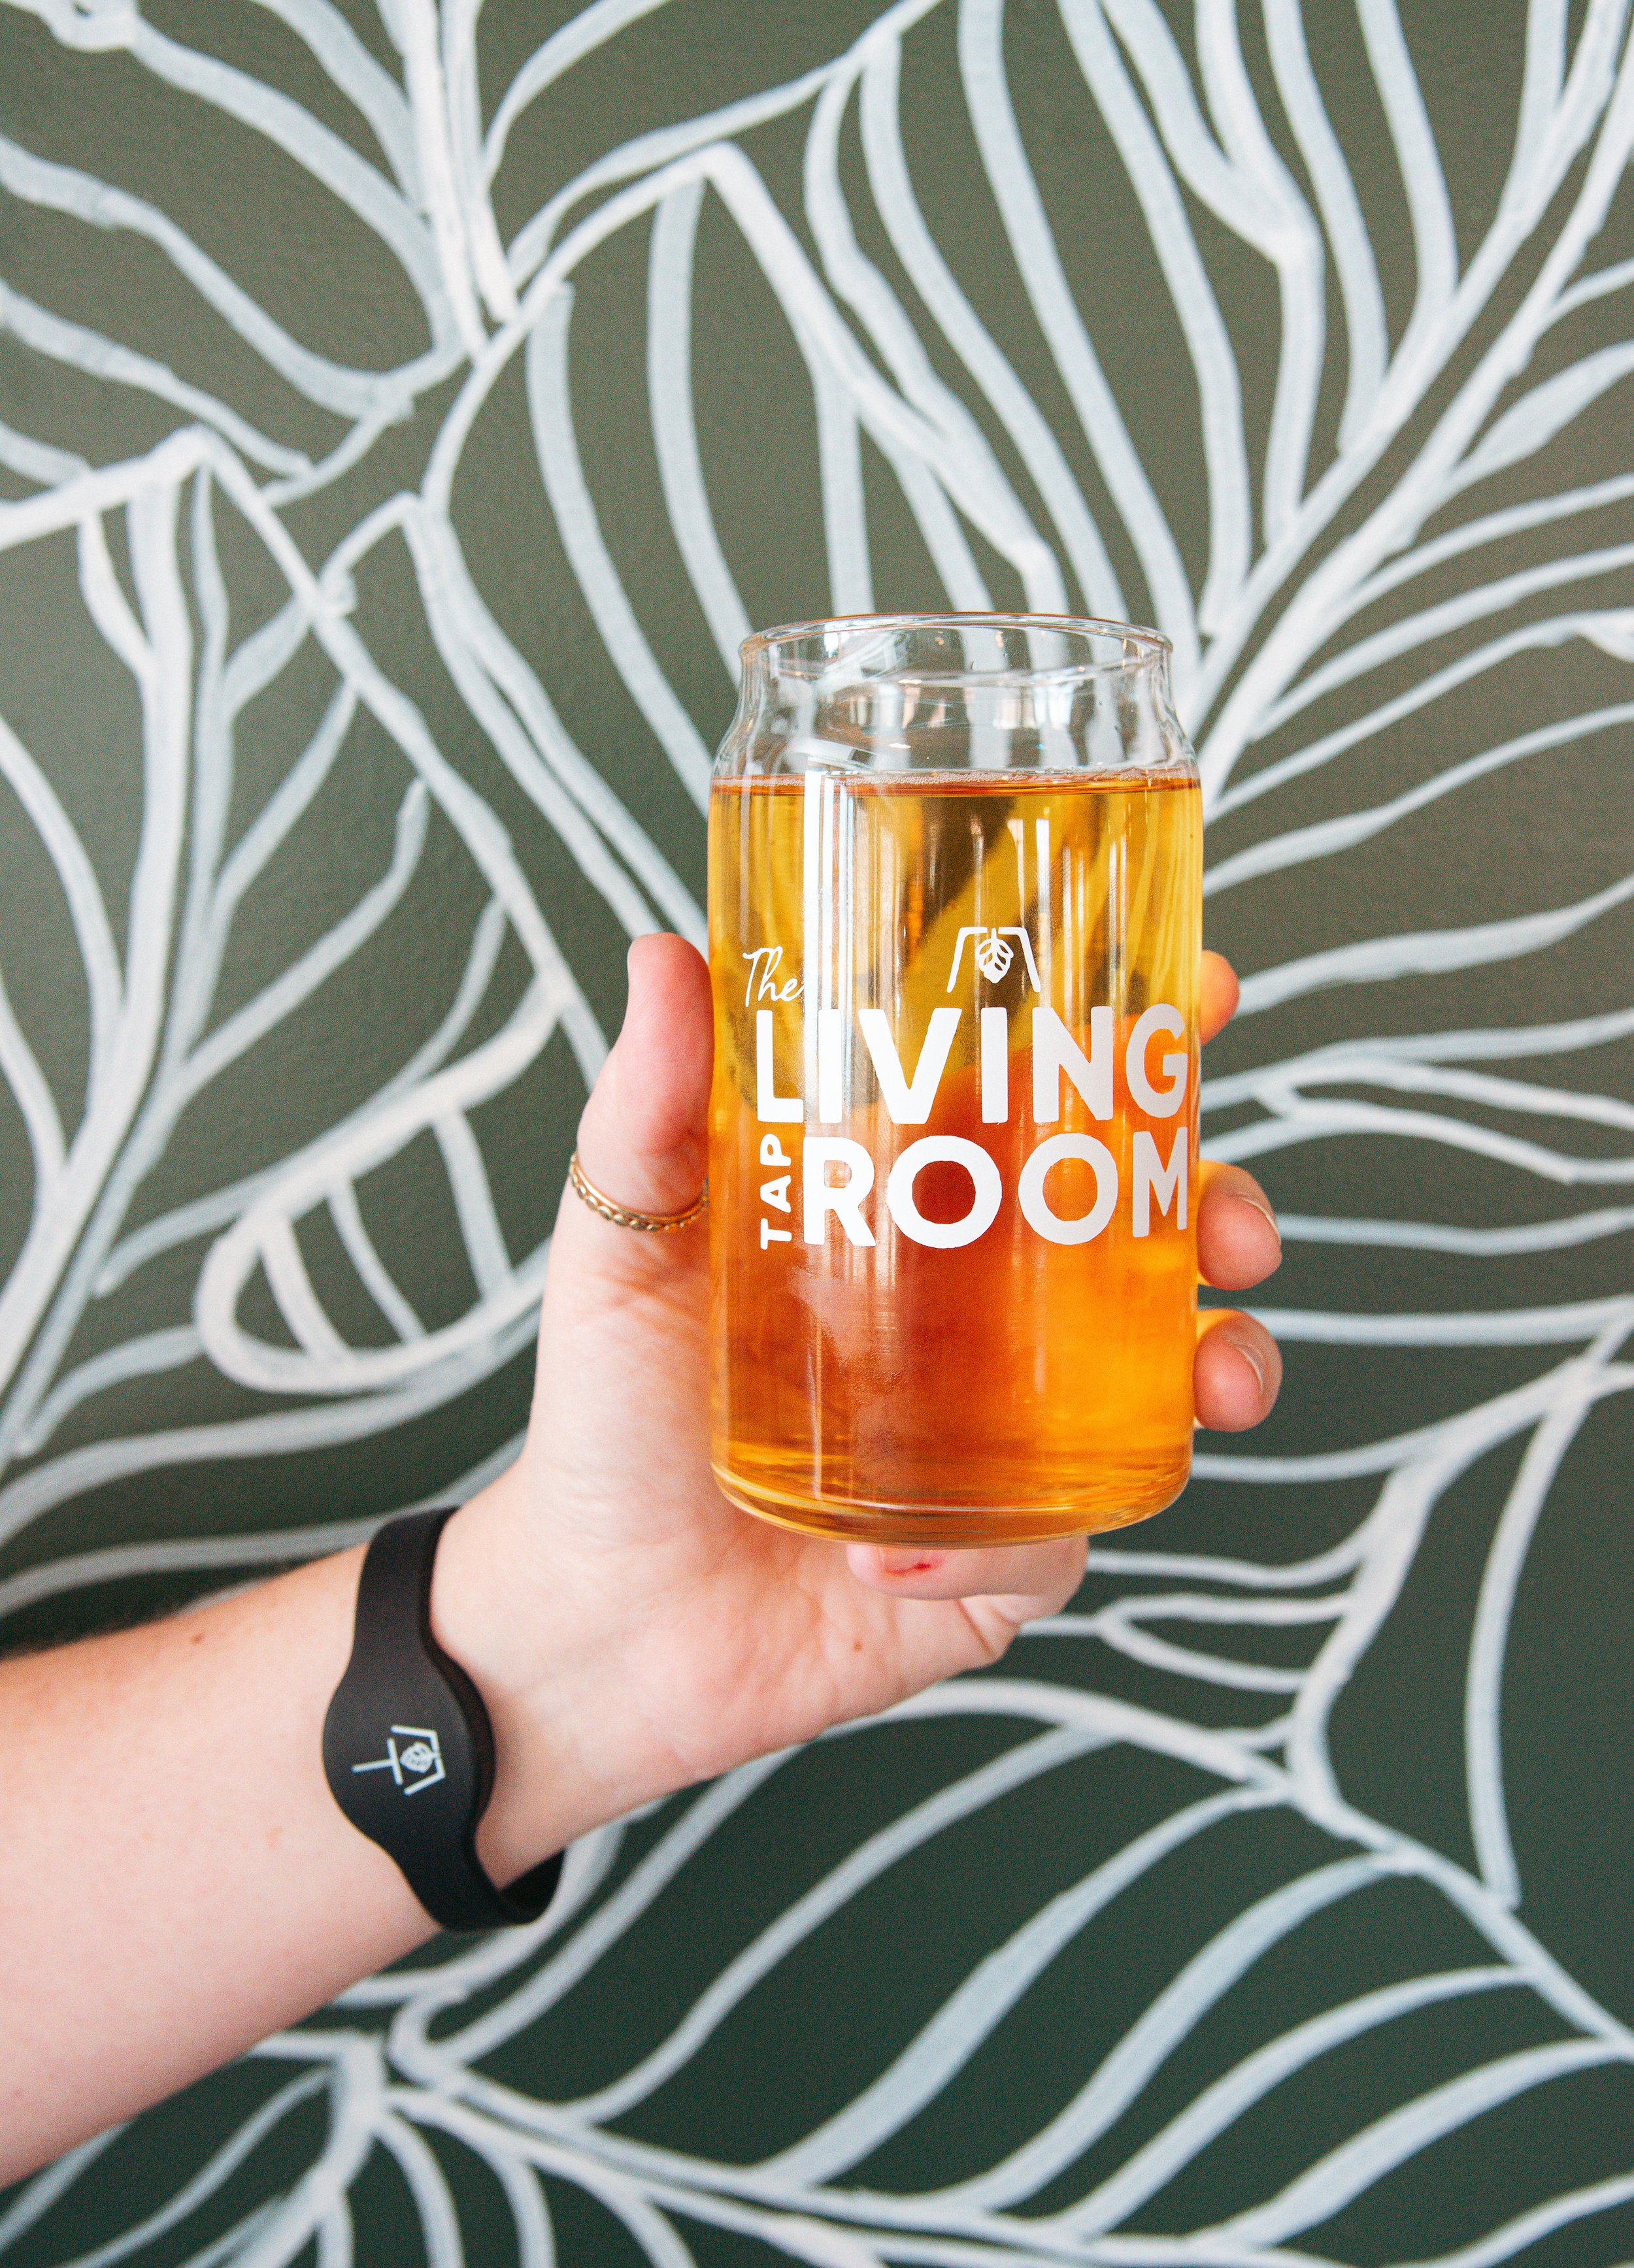 The Living Taproom in Tacoma